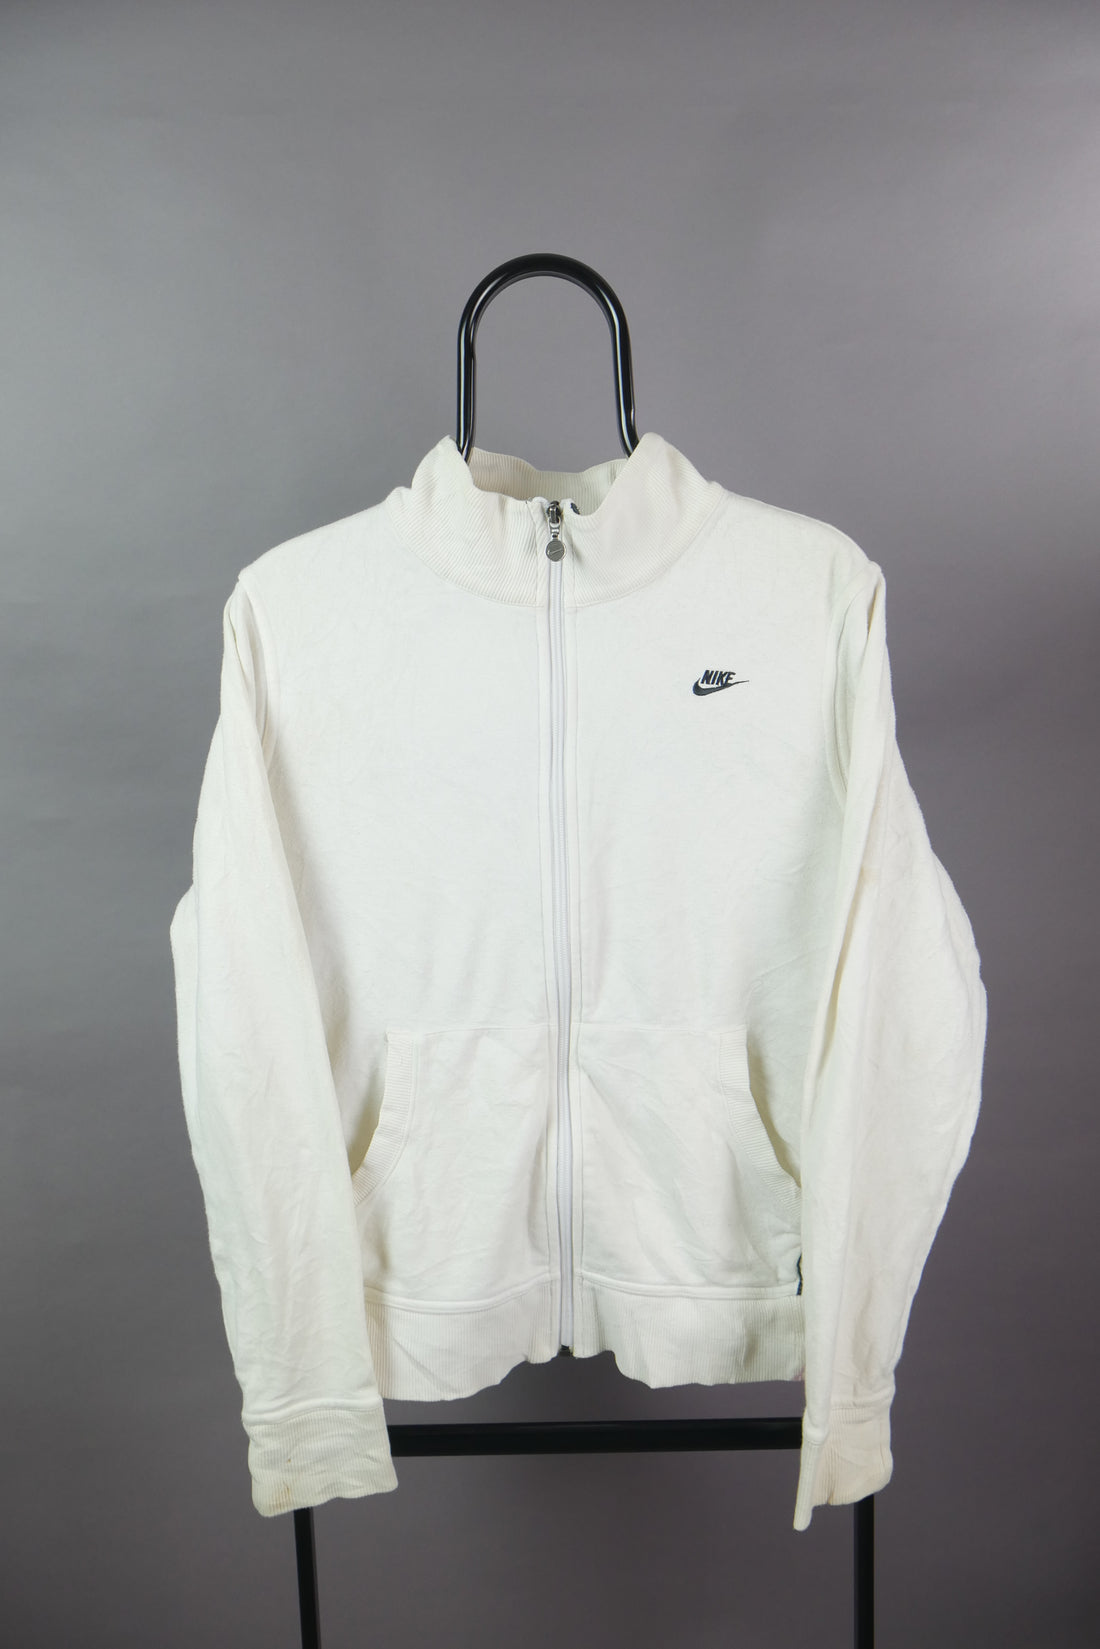 The Nike Zip Up (L)